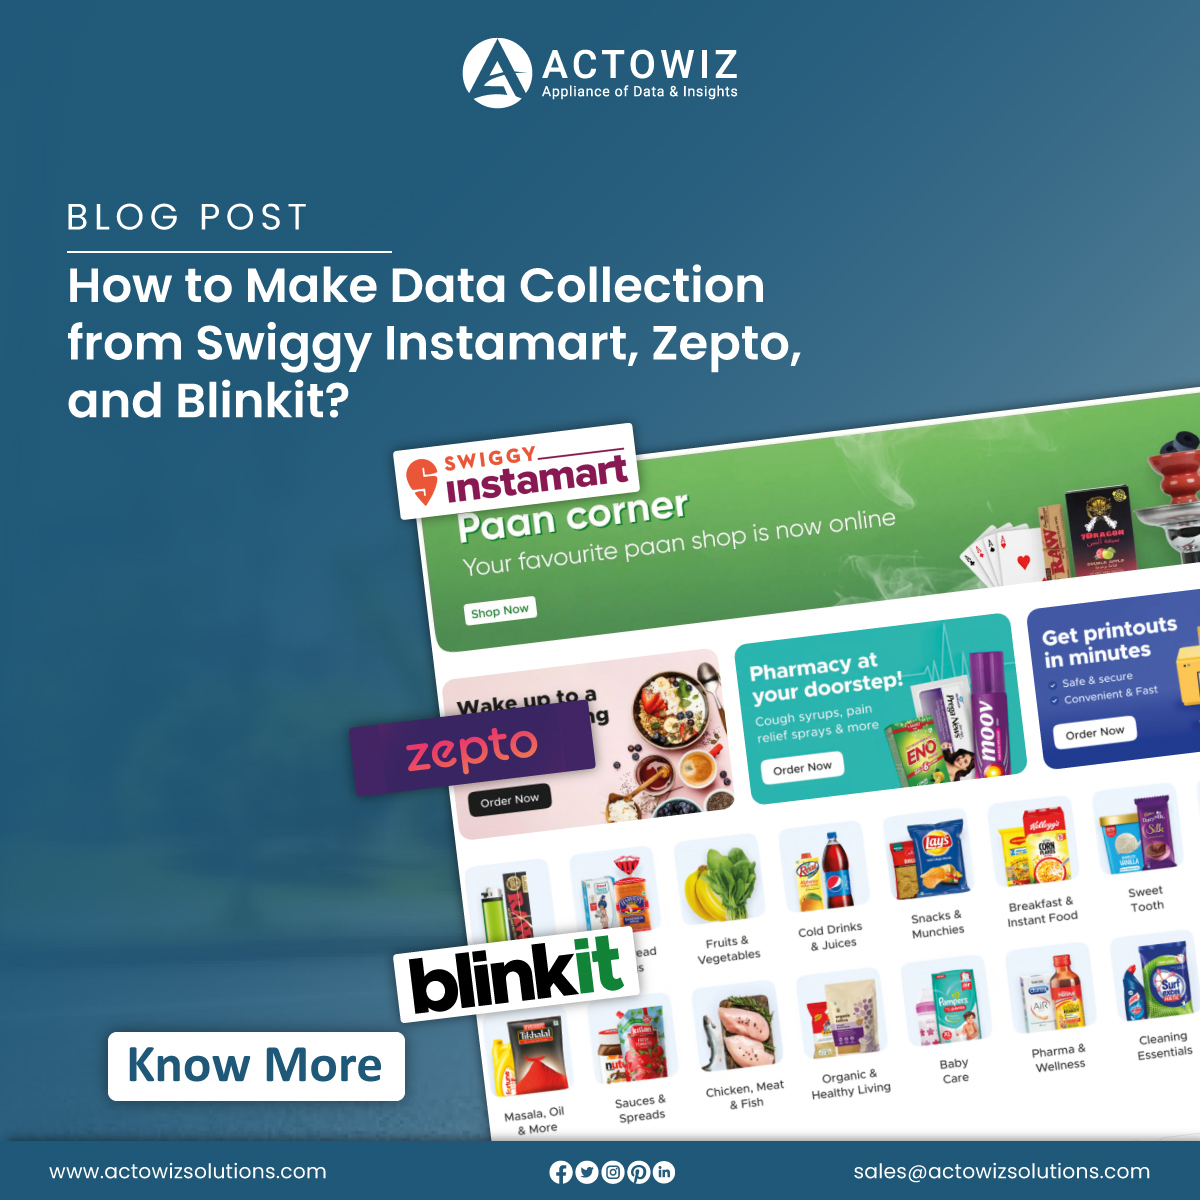 Learn how to collect data from Swiggy Instamart, Zepto, and Blinkit using web scraping techniques for market analysis and optimization. actowizsolutions.com/data-collectio… #SwiggyInstamartDataCollection #ScrapeSwiggyInstamartData #SwiggyInstamartDataScraping #ACTOWIZSOLUTIONS #USA #UK #UAE